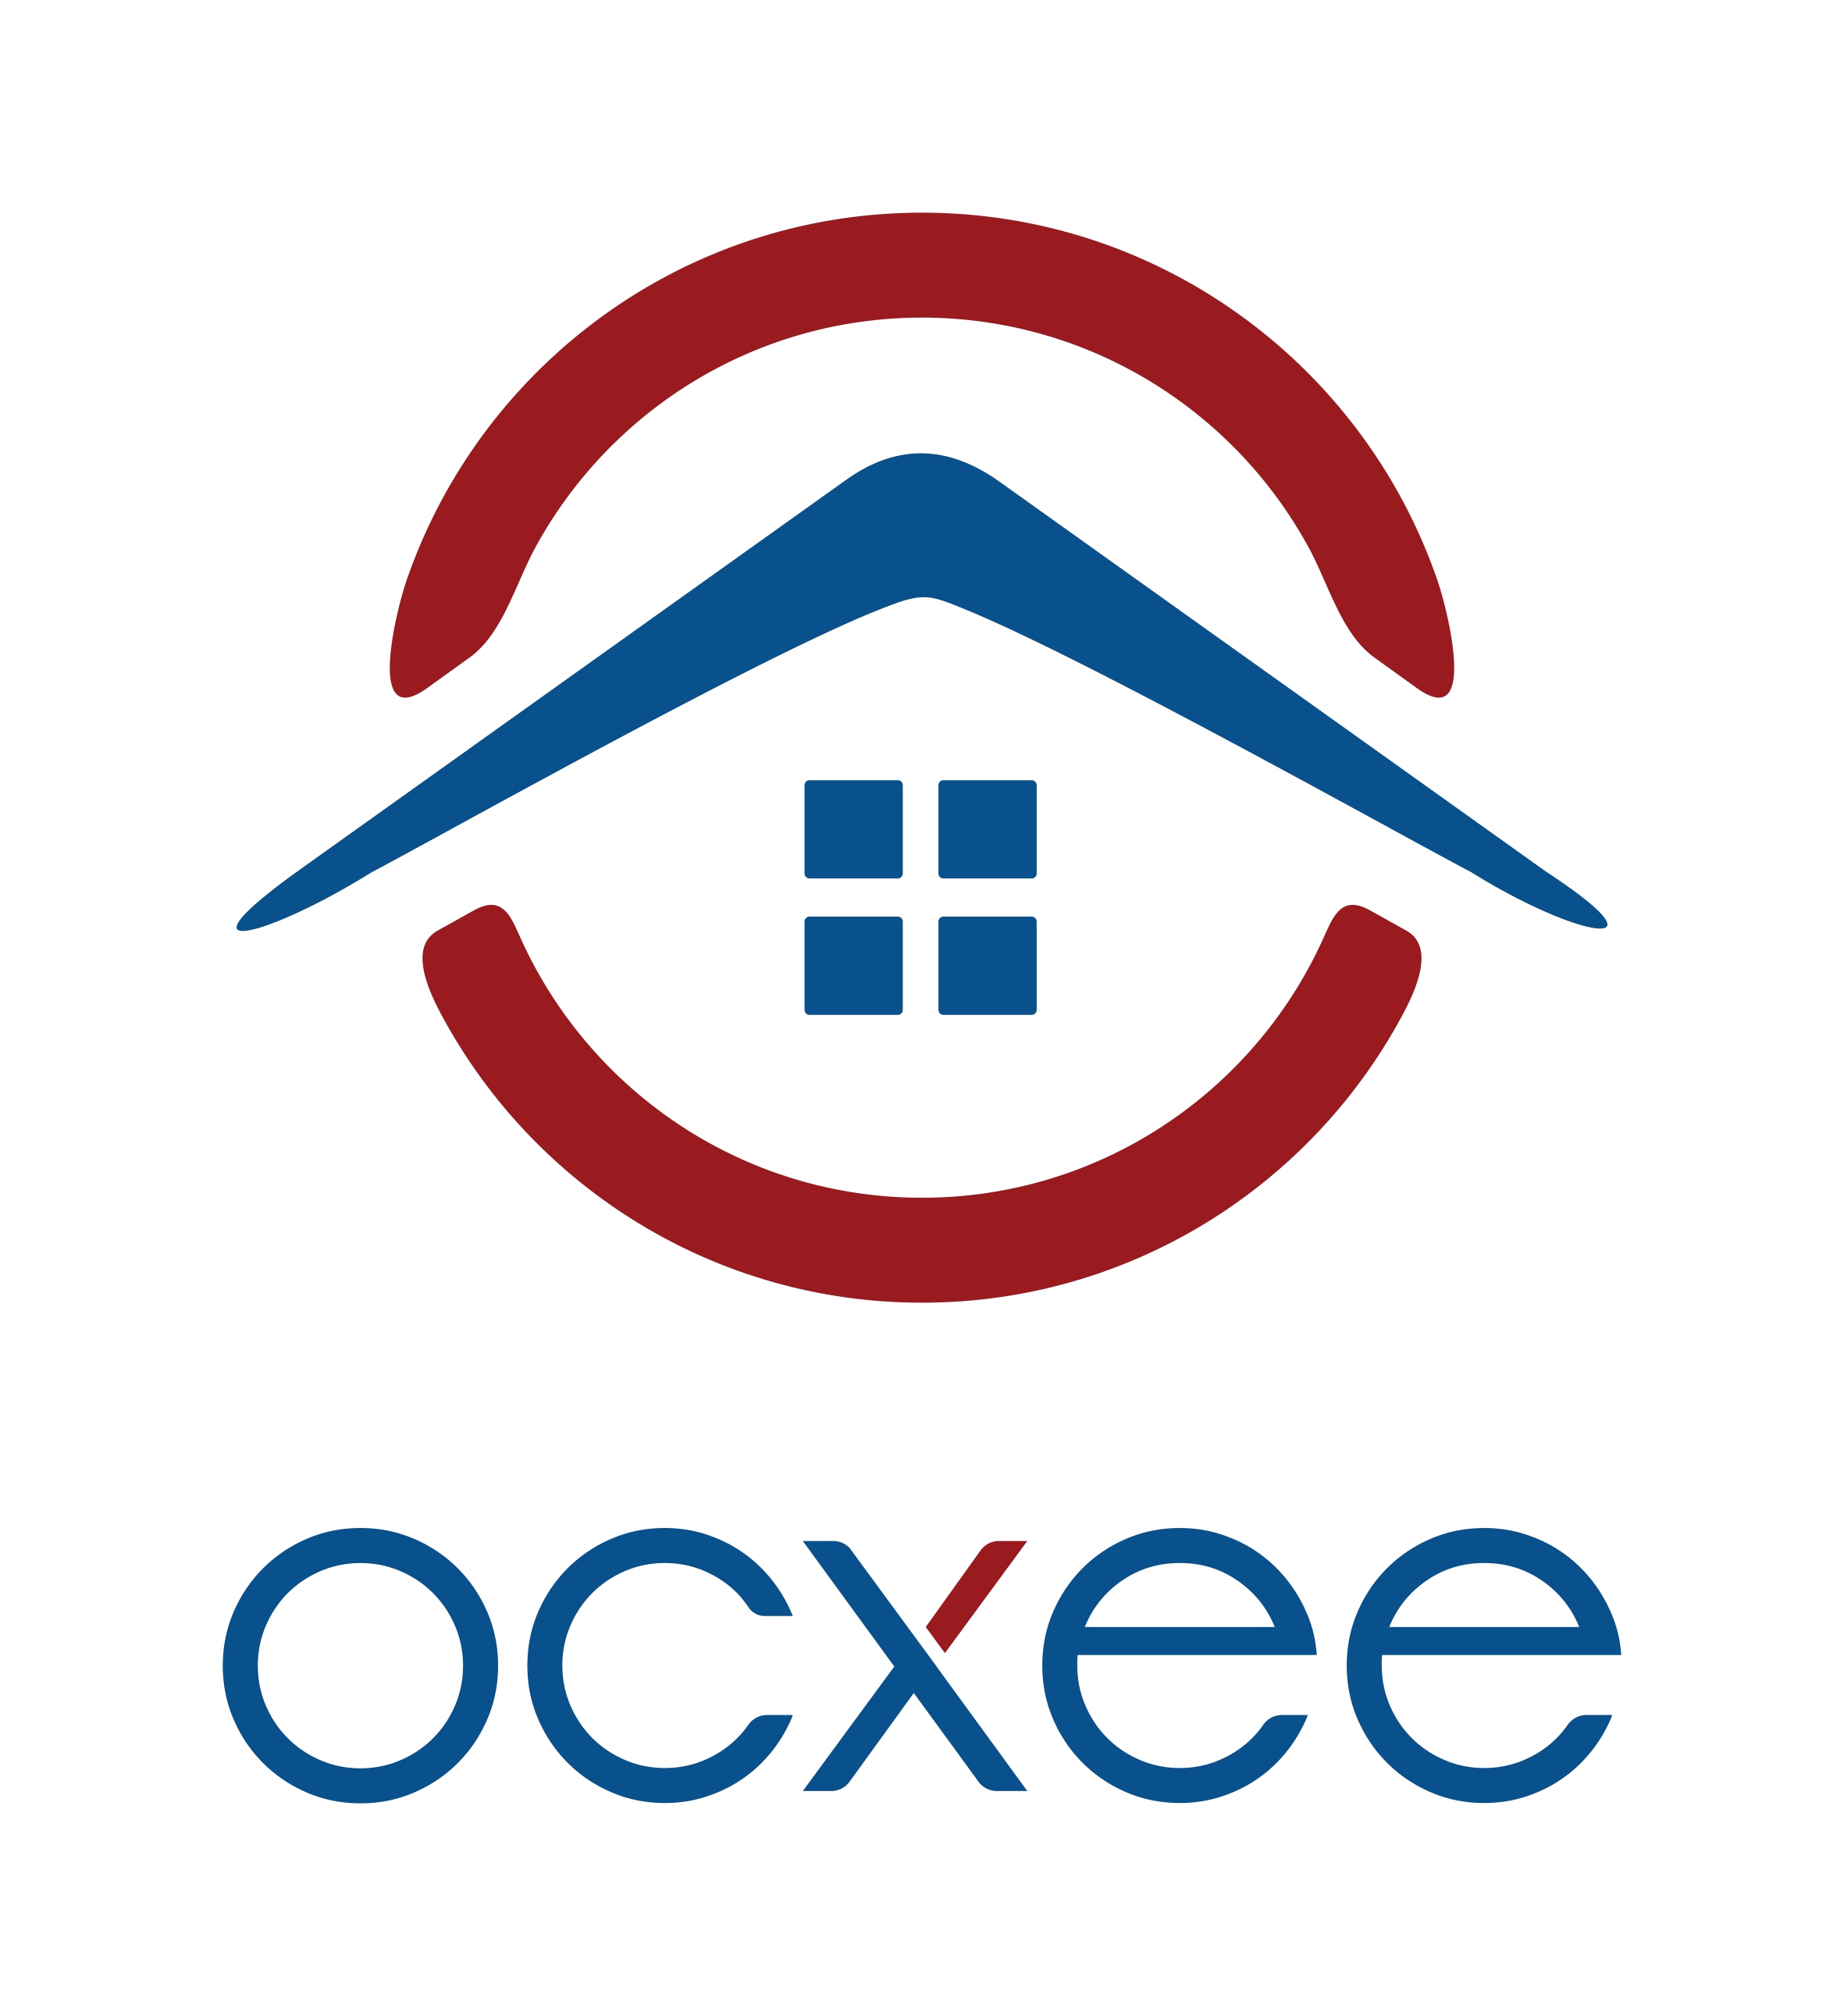 Logo of OCXEE - International Students Accommodation Provider Educational Services In Harrow, Middlesex